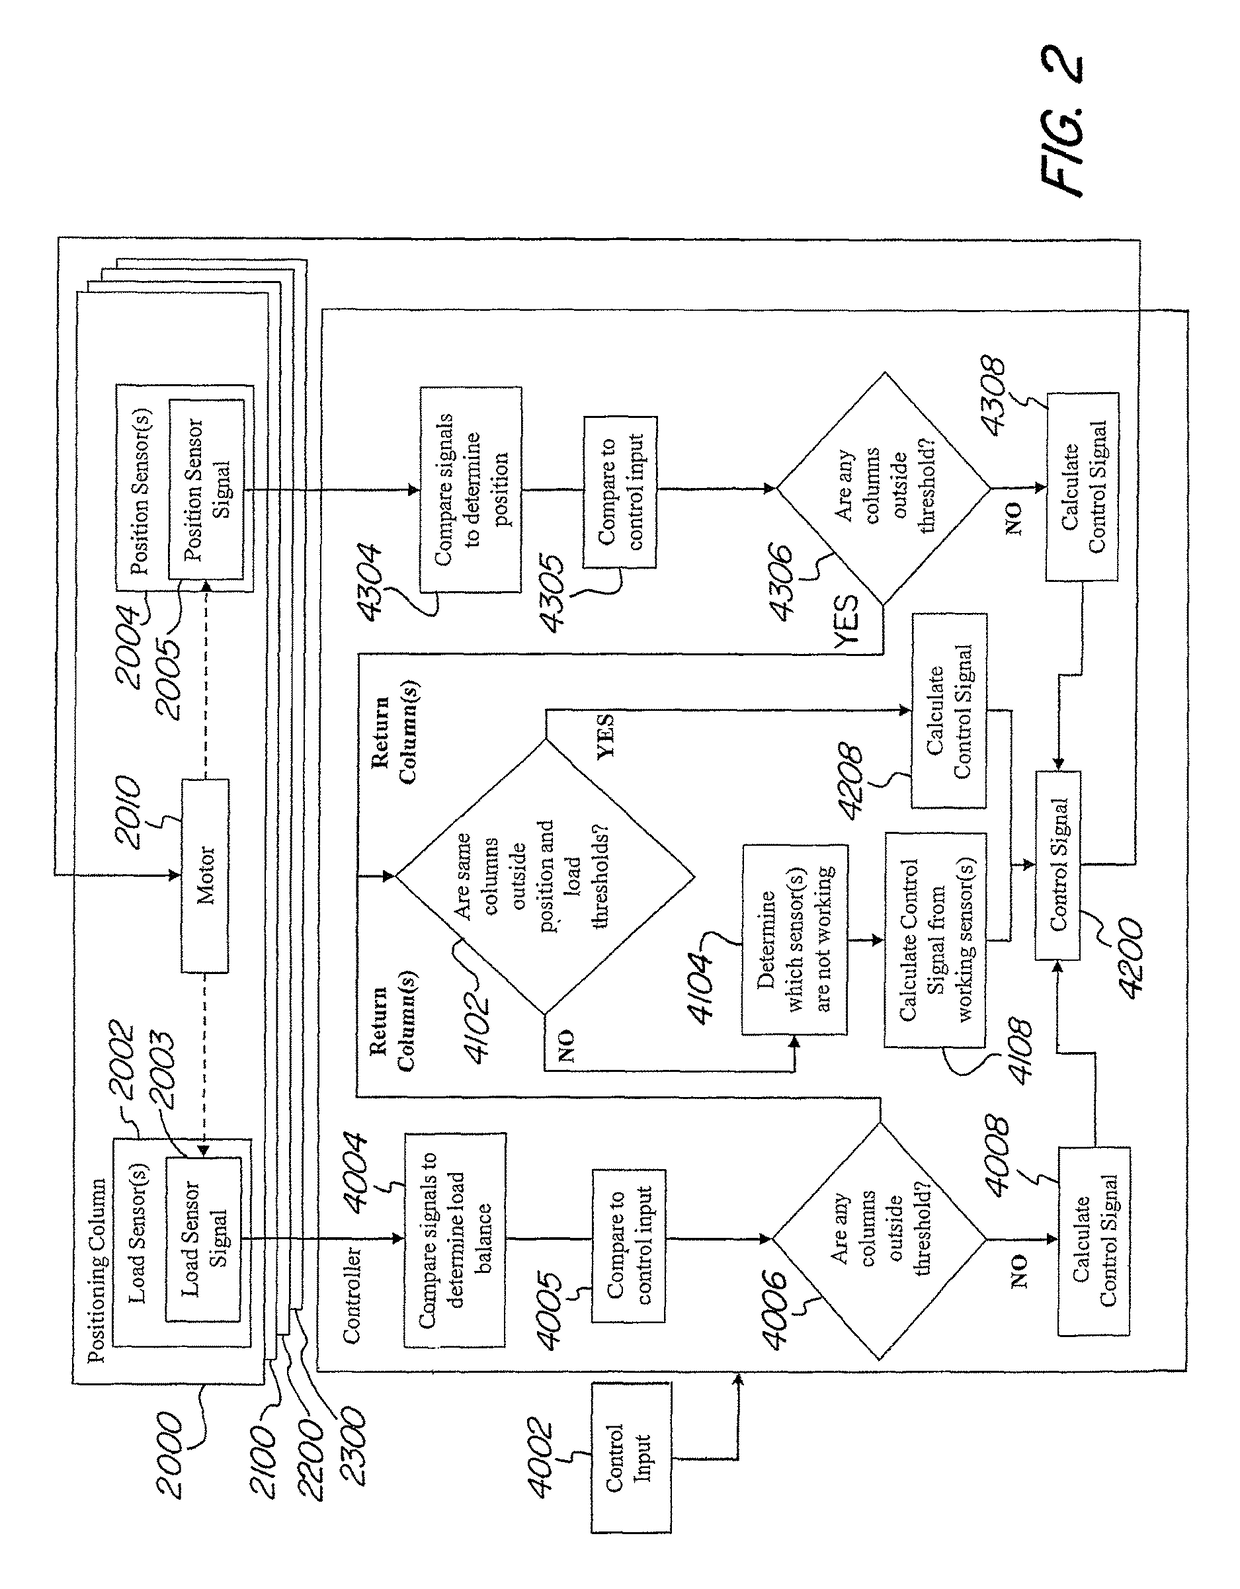 Machinery positioning apparatus having independent drive columns